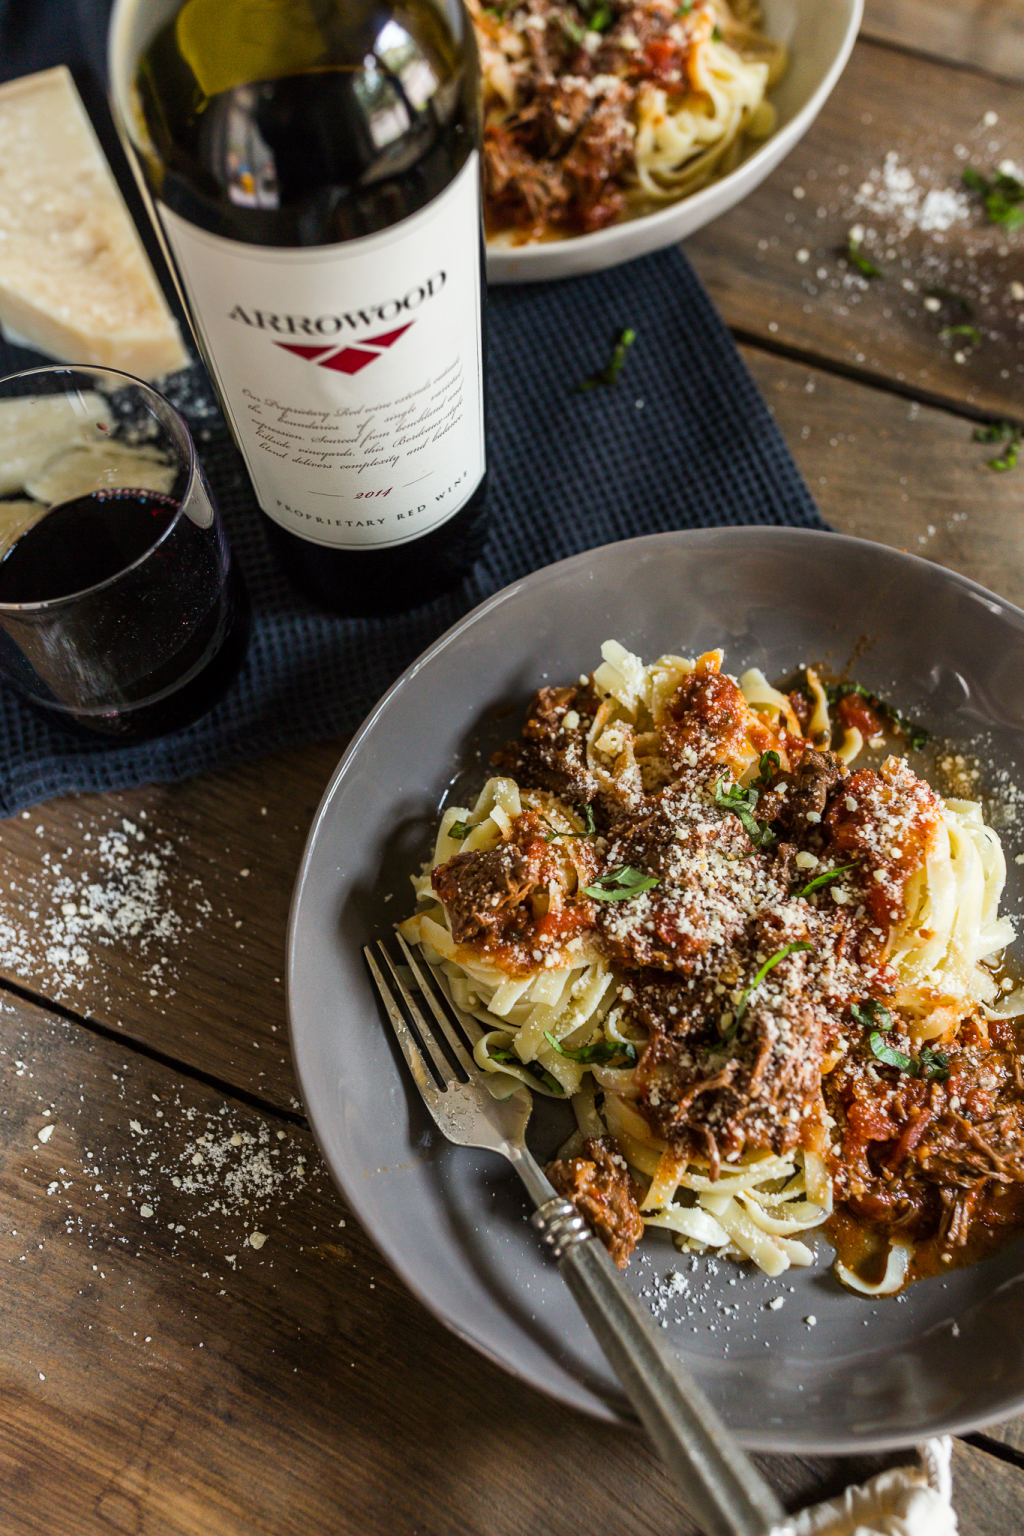 A plate of red wine braised short rub ragu over tagliatelle pasta with a bottle of Arrowood wine next to the plate on a table.